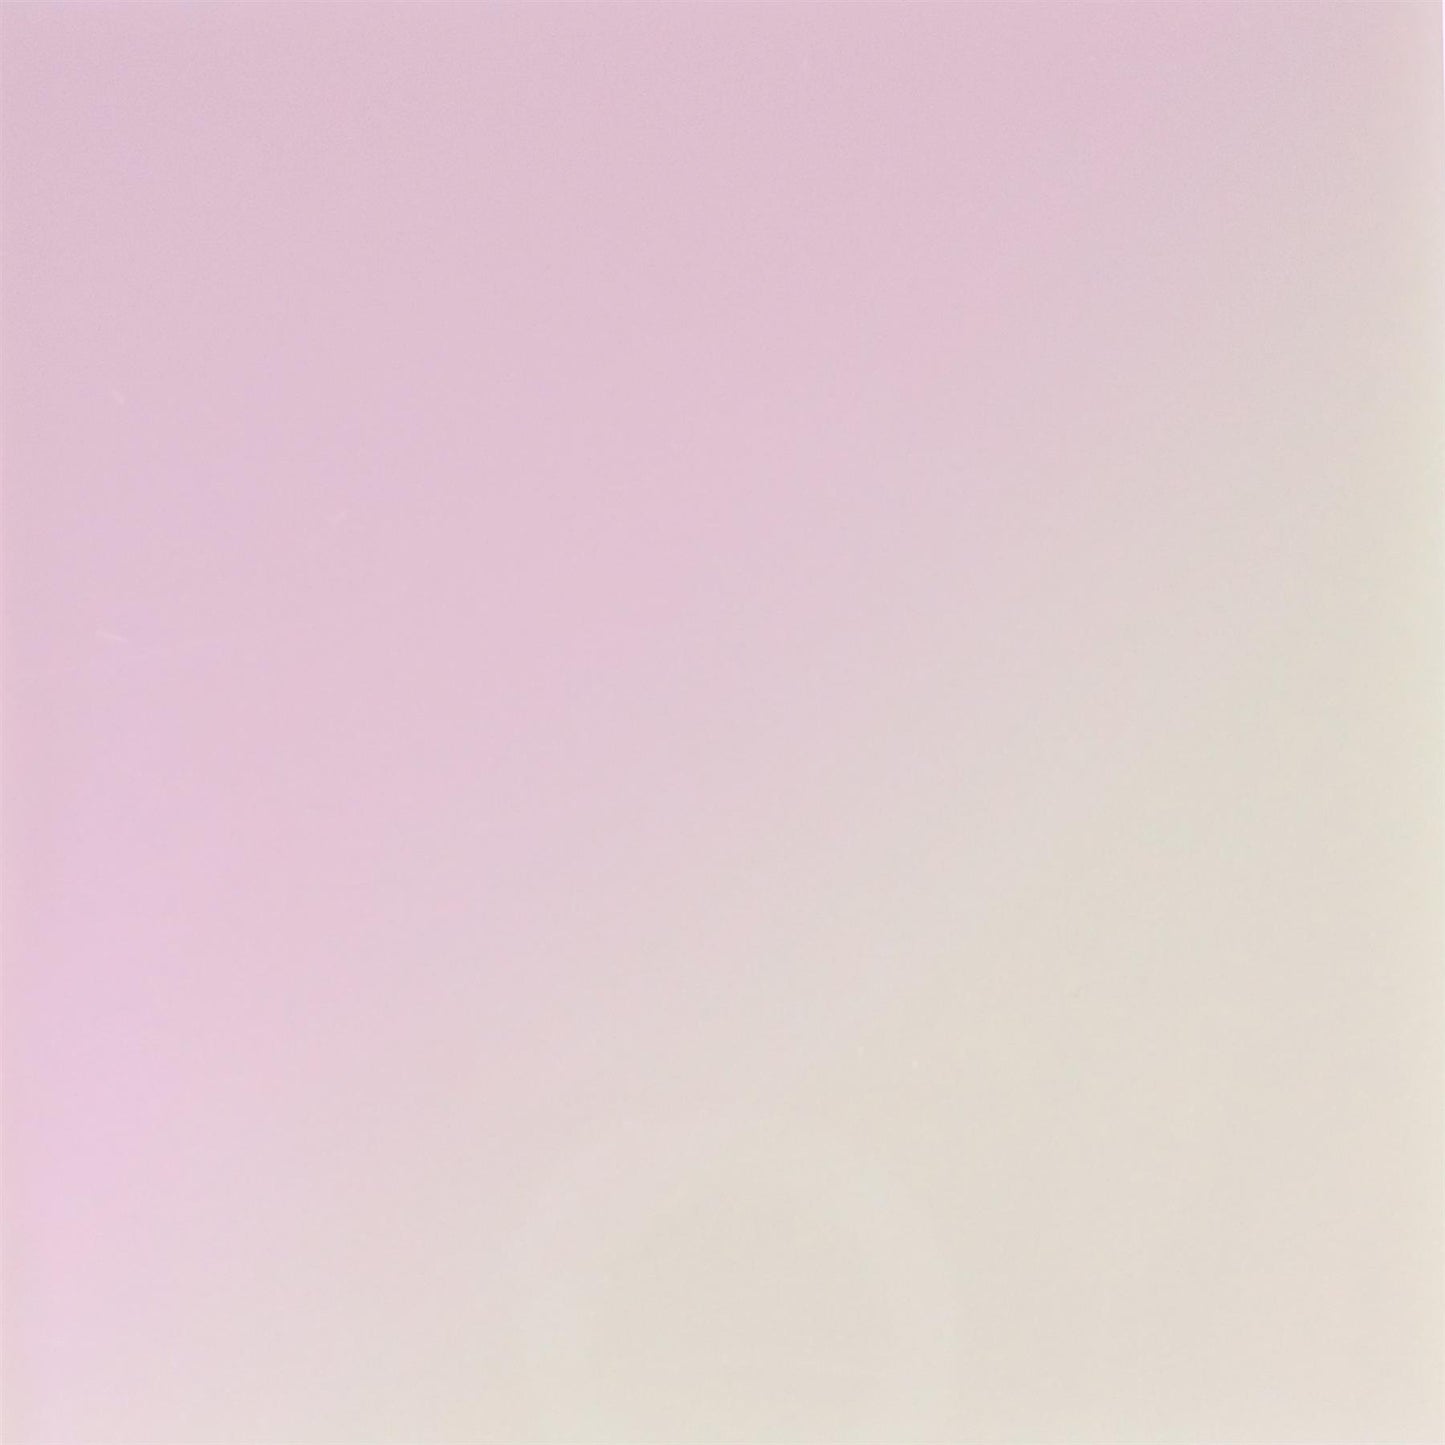 Incudo Pink Pearlescent Acrylic Sheet - 98x98x3mm (Sample)